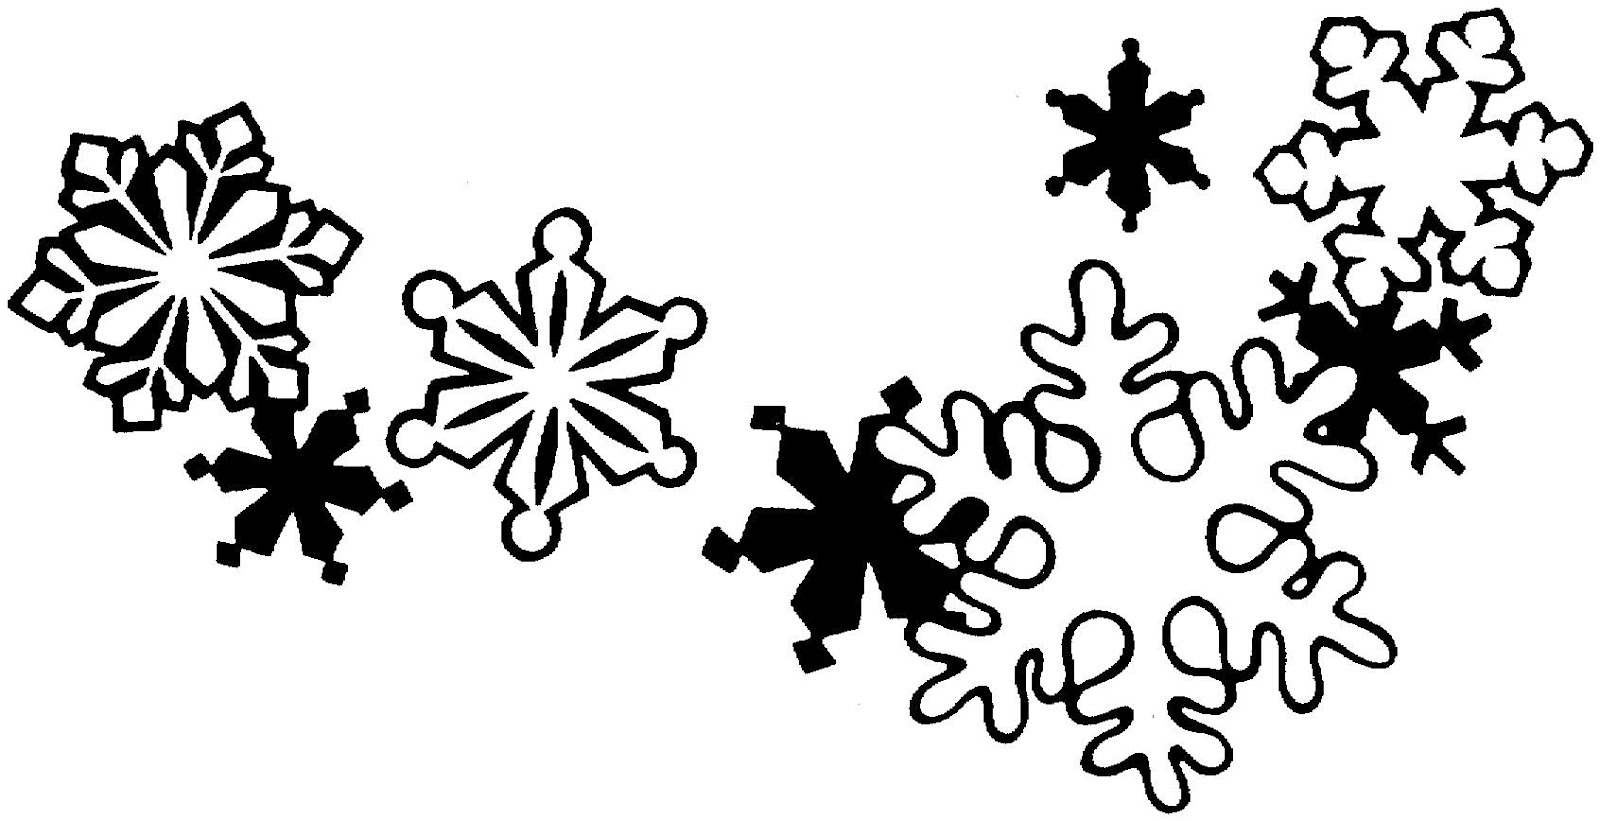 snowflake clipart black% . - Snowflake Clipart Black And White